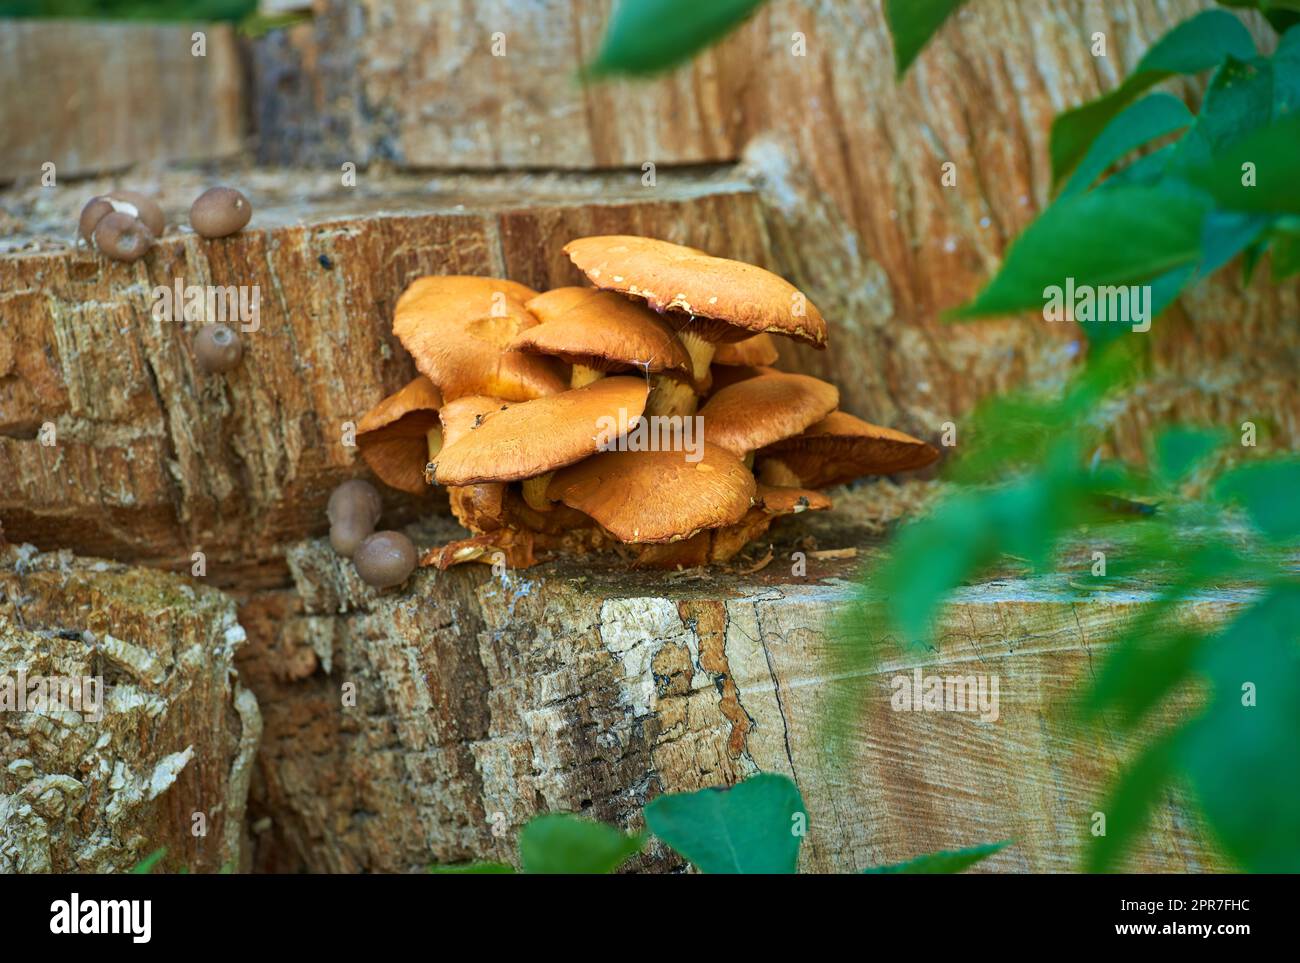 Closeup of wild porcini mushrooms growing on a tree stump in an organic lush forest. Plants growing and blooming in an ecological and sustainable environment during springtime in the wilderness Stock Photo